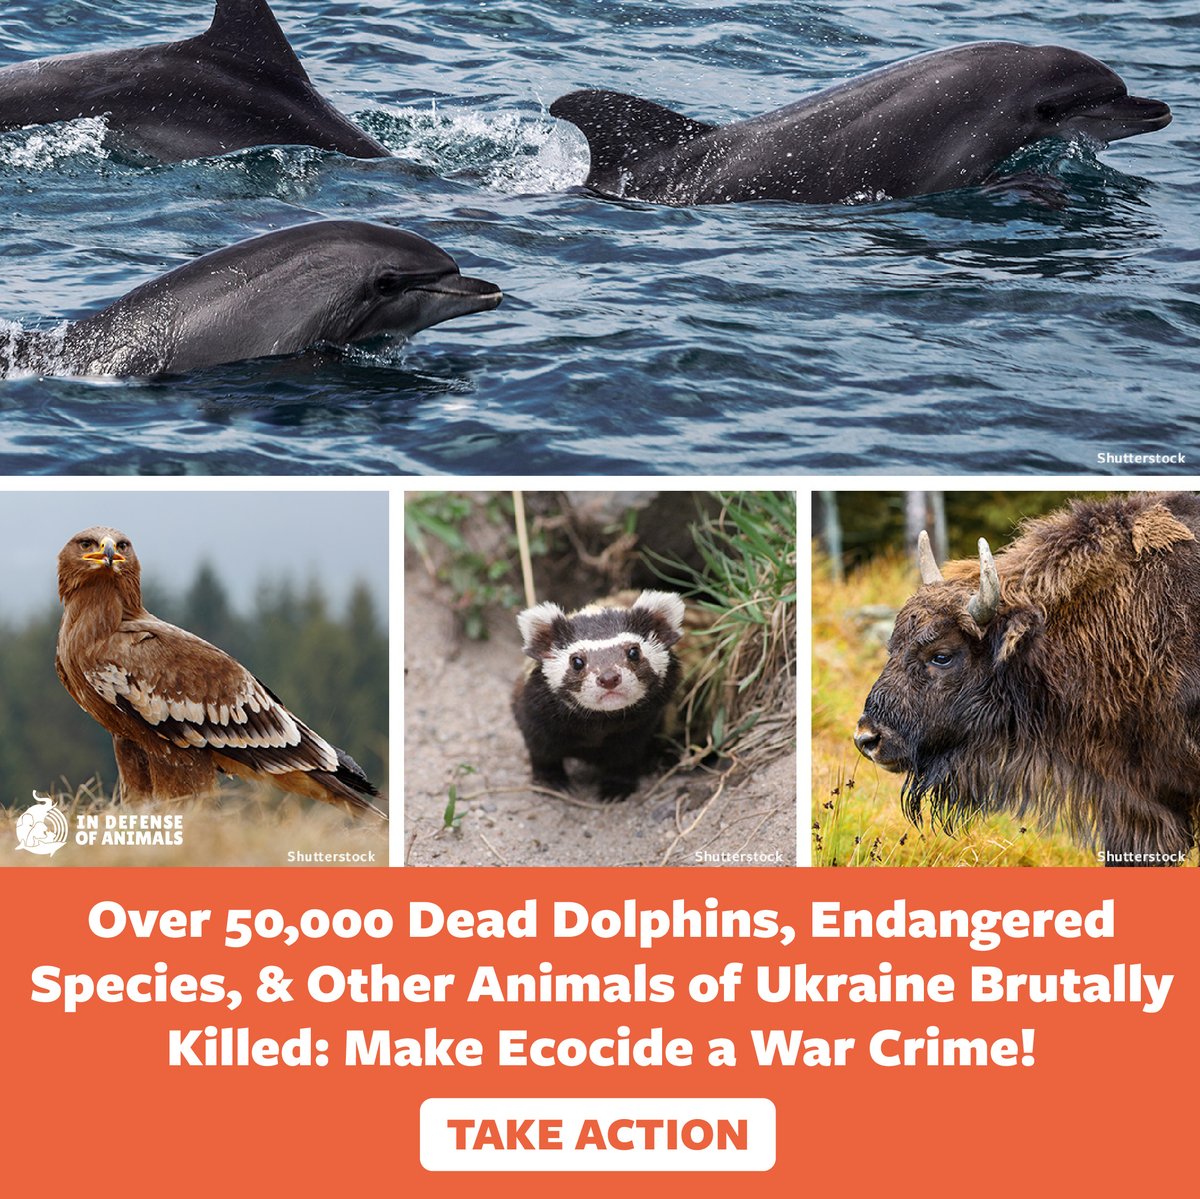 Demand #Justice4Animals for over 50,000 dead dolphins & #EndangeredSpecies in #Ukraine! #MakeEcocideAWarCrime!
Take action: bit.ly/4blzAke
Pls RT and support our work: bit.ly/4bffqZc